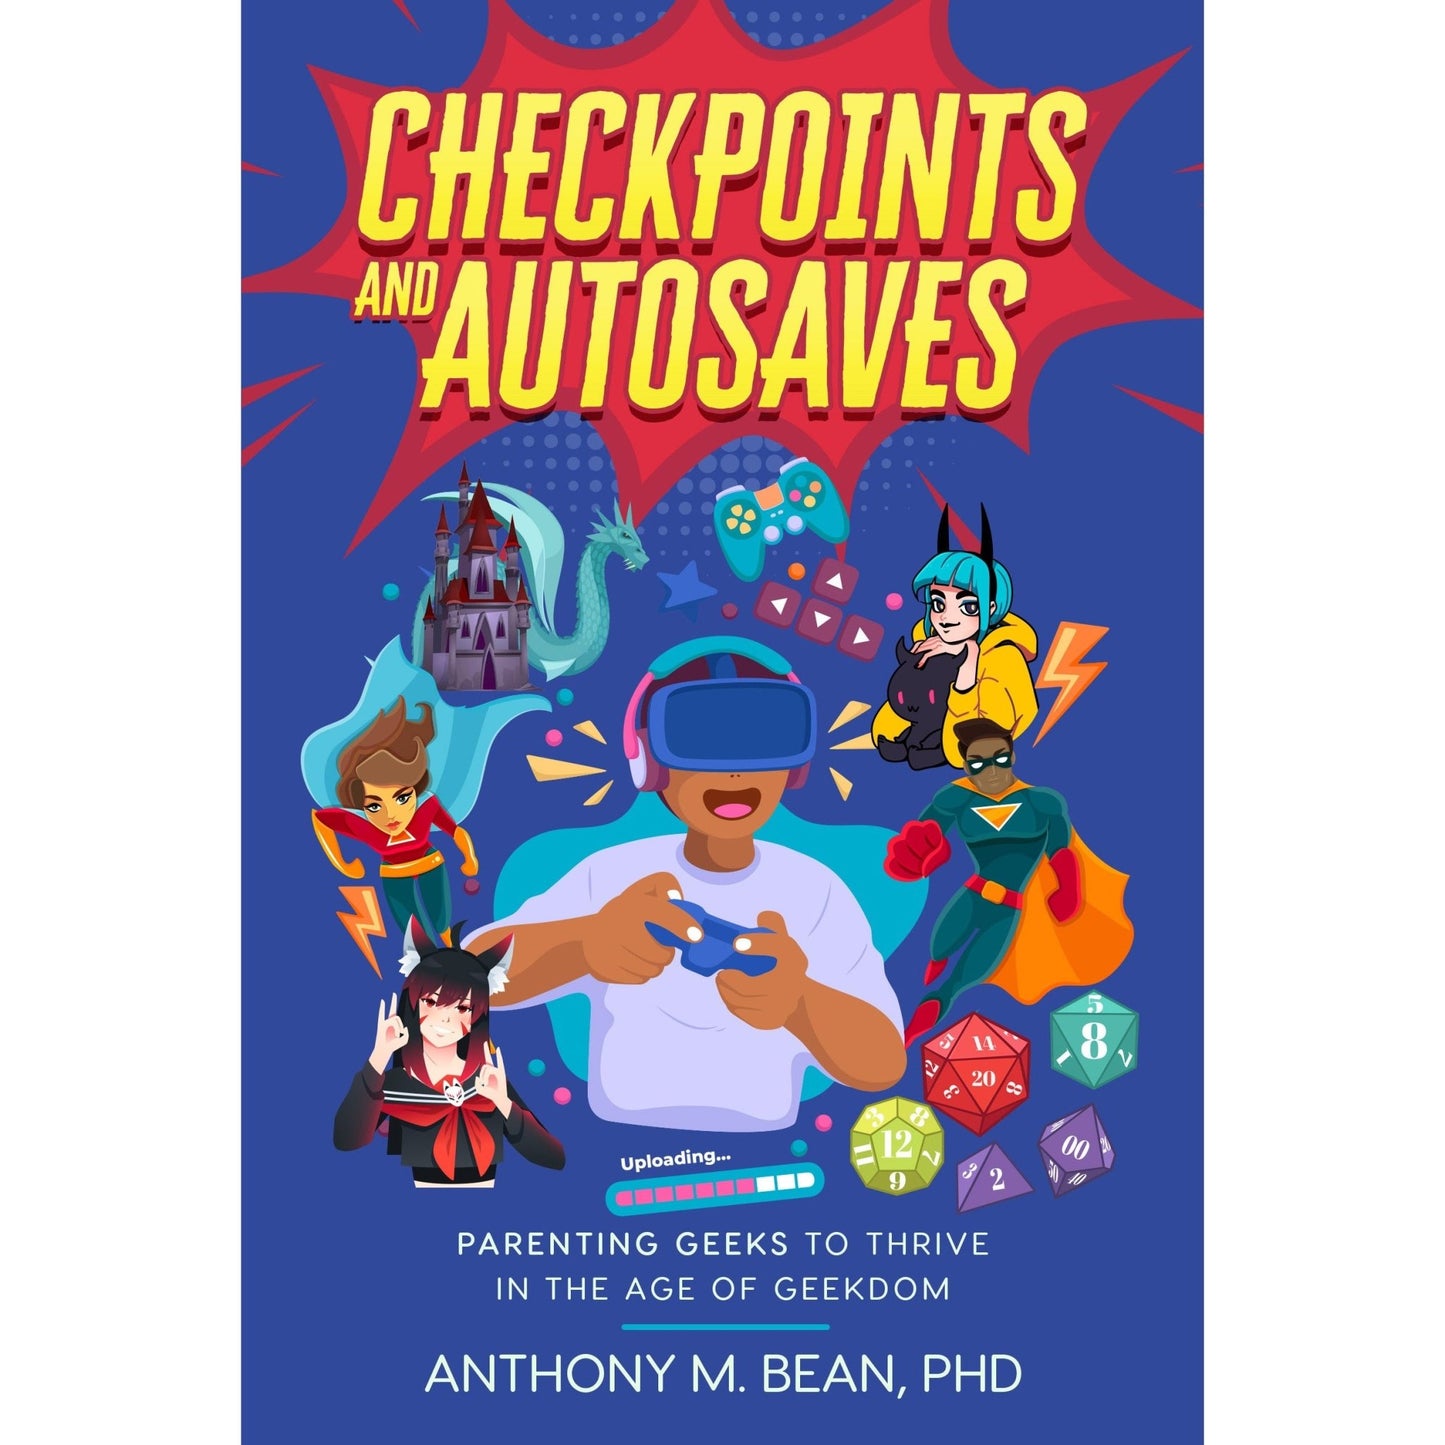 Checkpoints and Autosaves: Parenting Geeks to Thrive in the Age of Geekdom - Geek Therapeutics